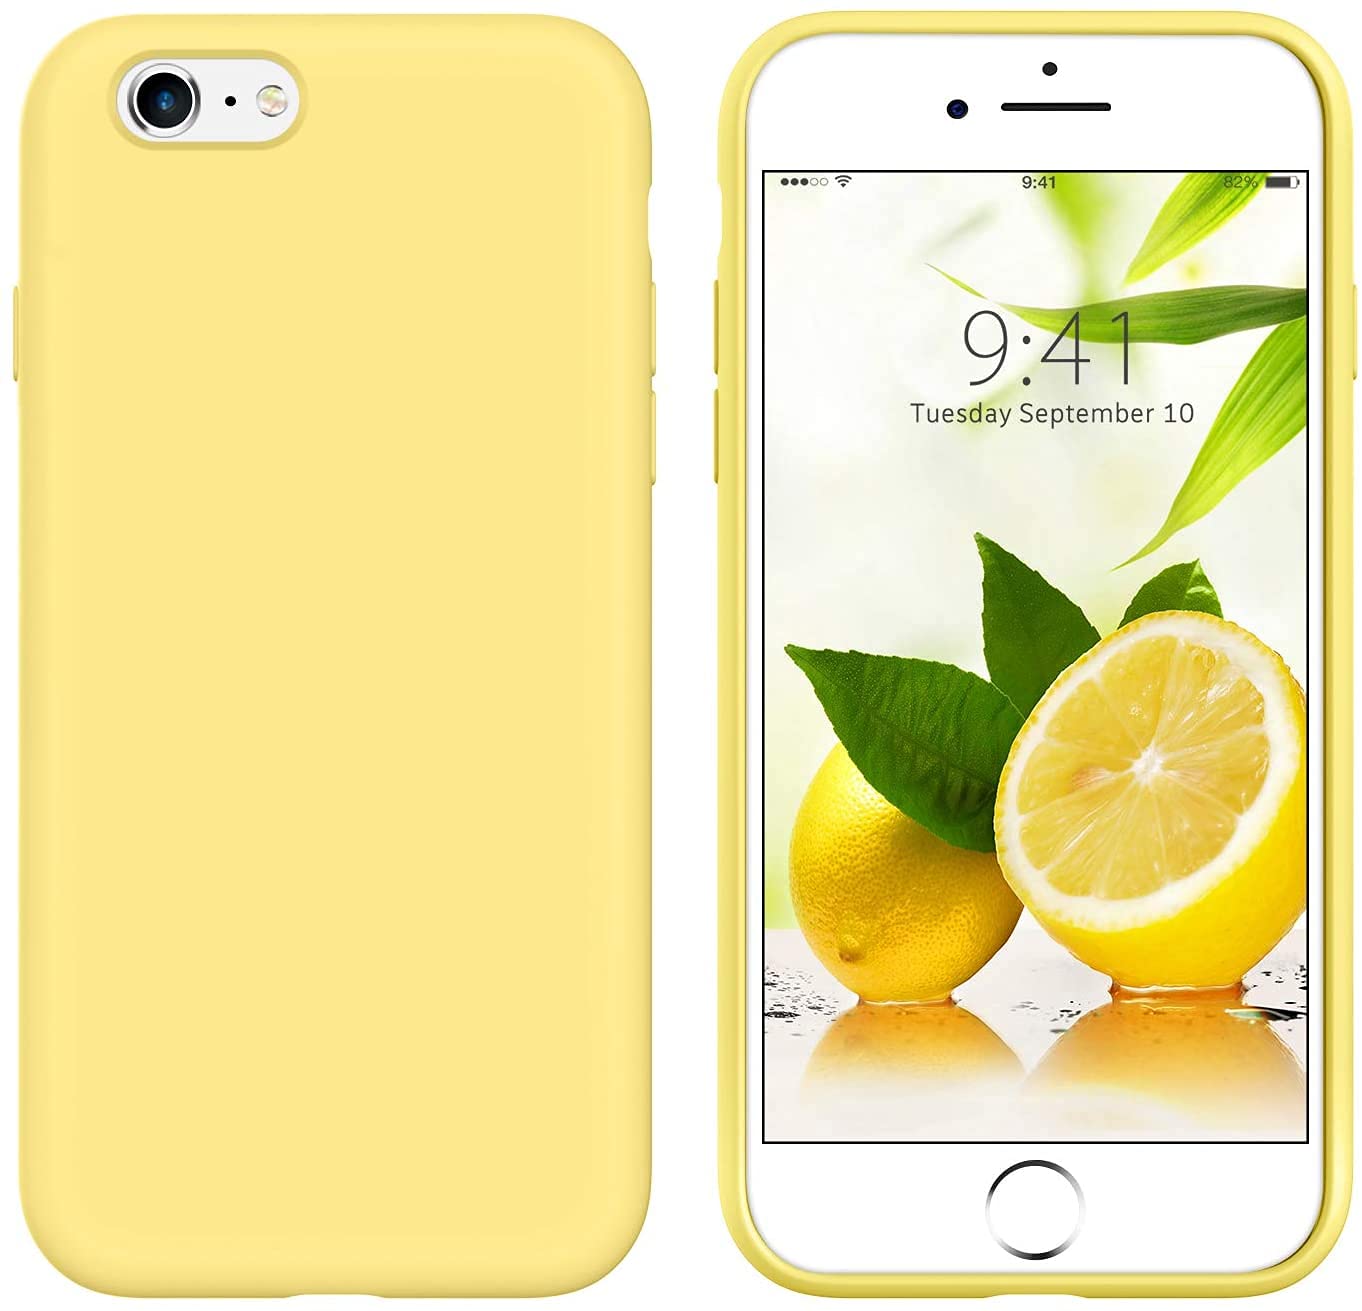 GUAGUA iPhone 6s Case iPhone 6 Case Liquid Silicone Soft Gel Rubber Slim Lightweight Microfiber Lining Cushion Texture Cover Shockproof Protective Anti-Scratched Phone Cases for iPhone 6/6S Yellow